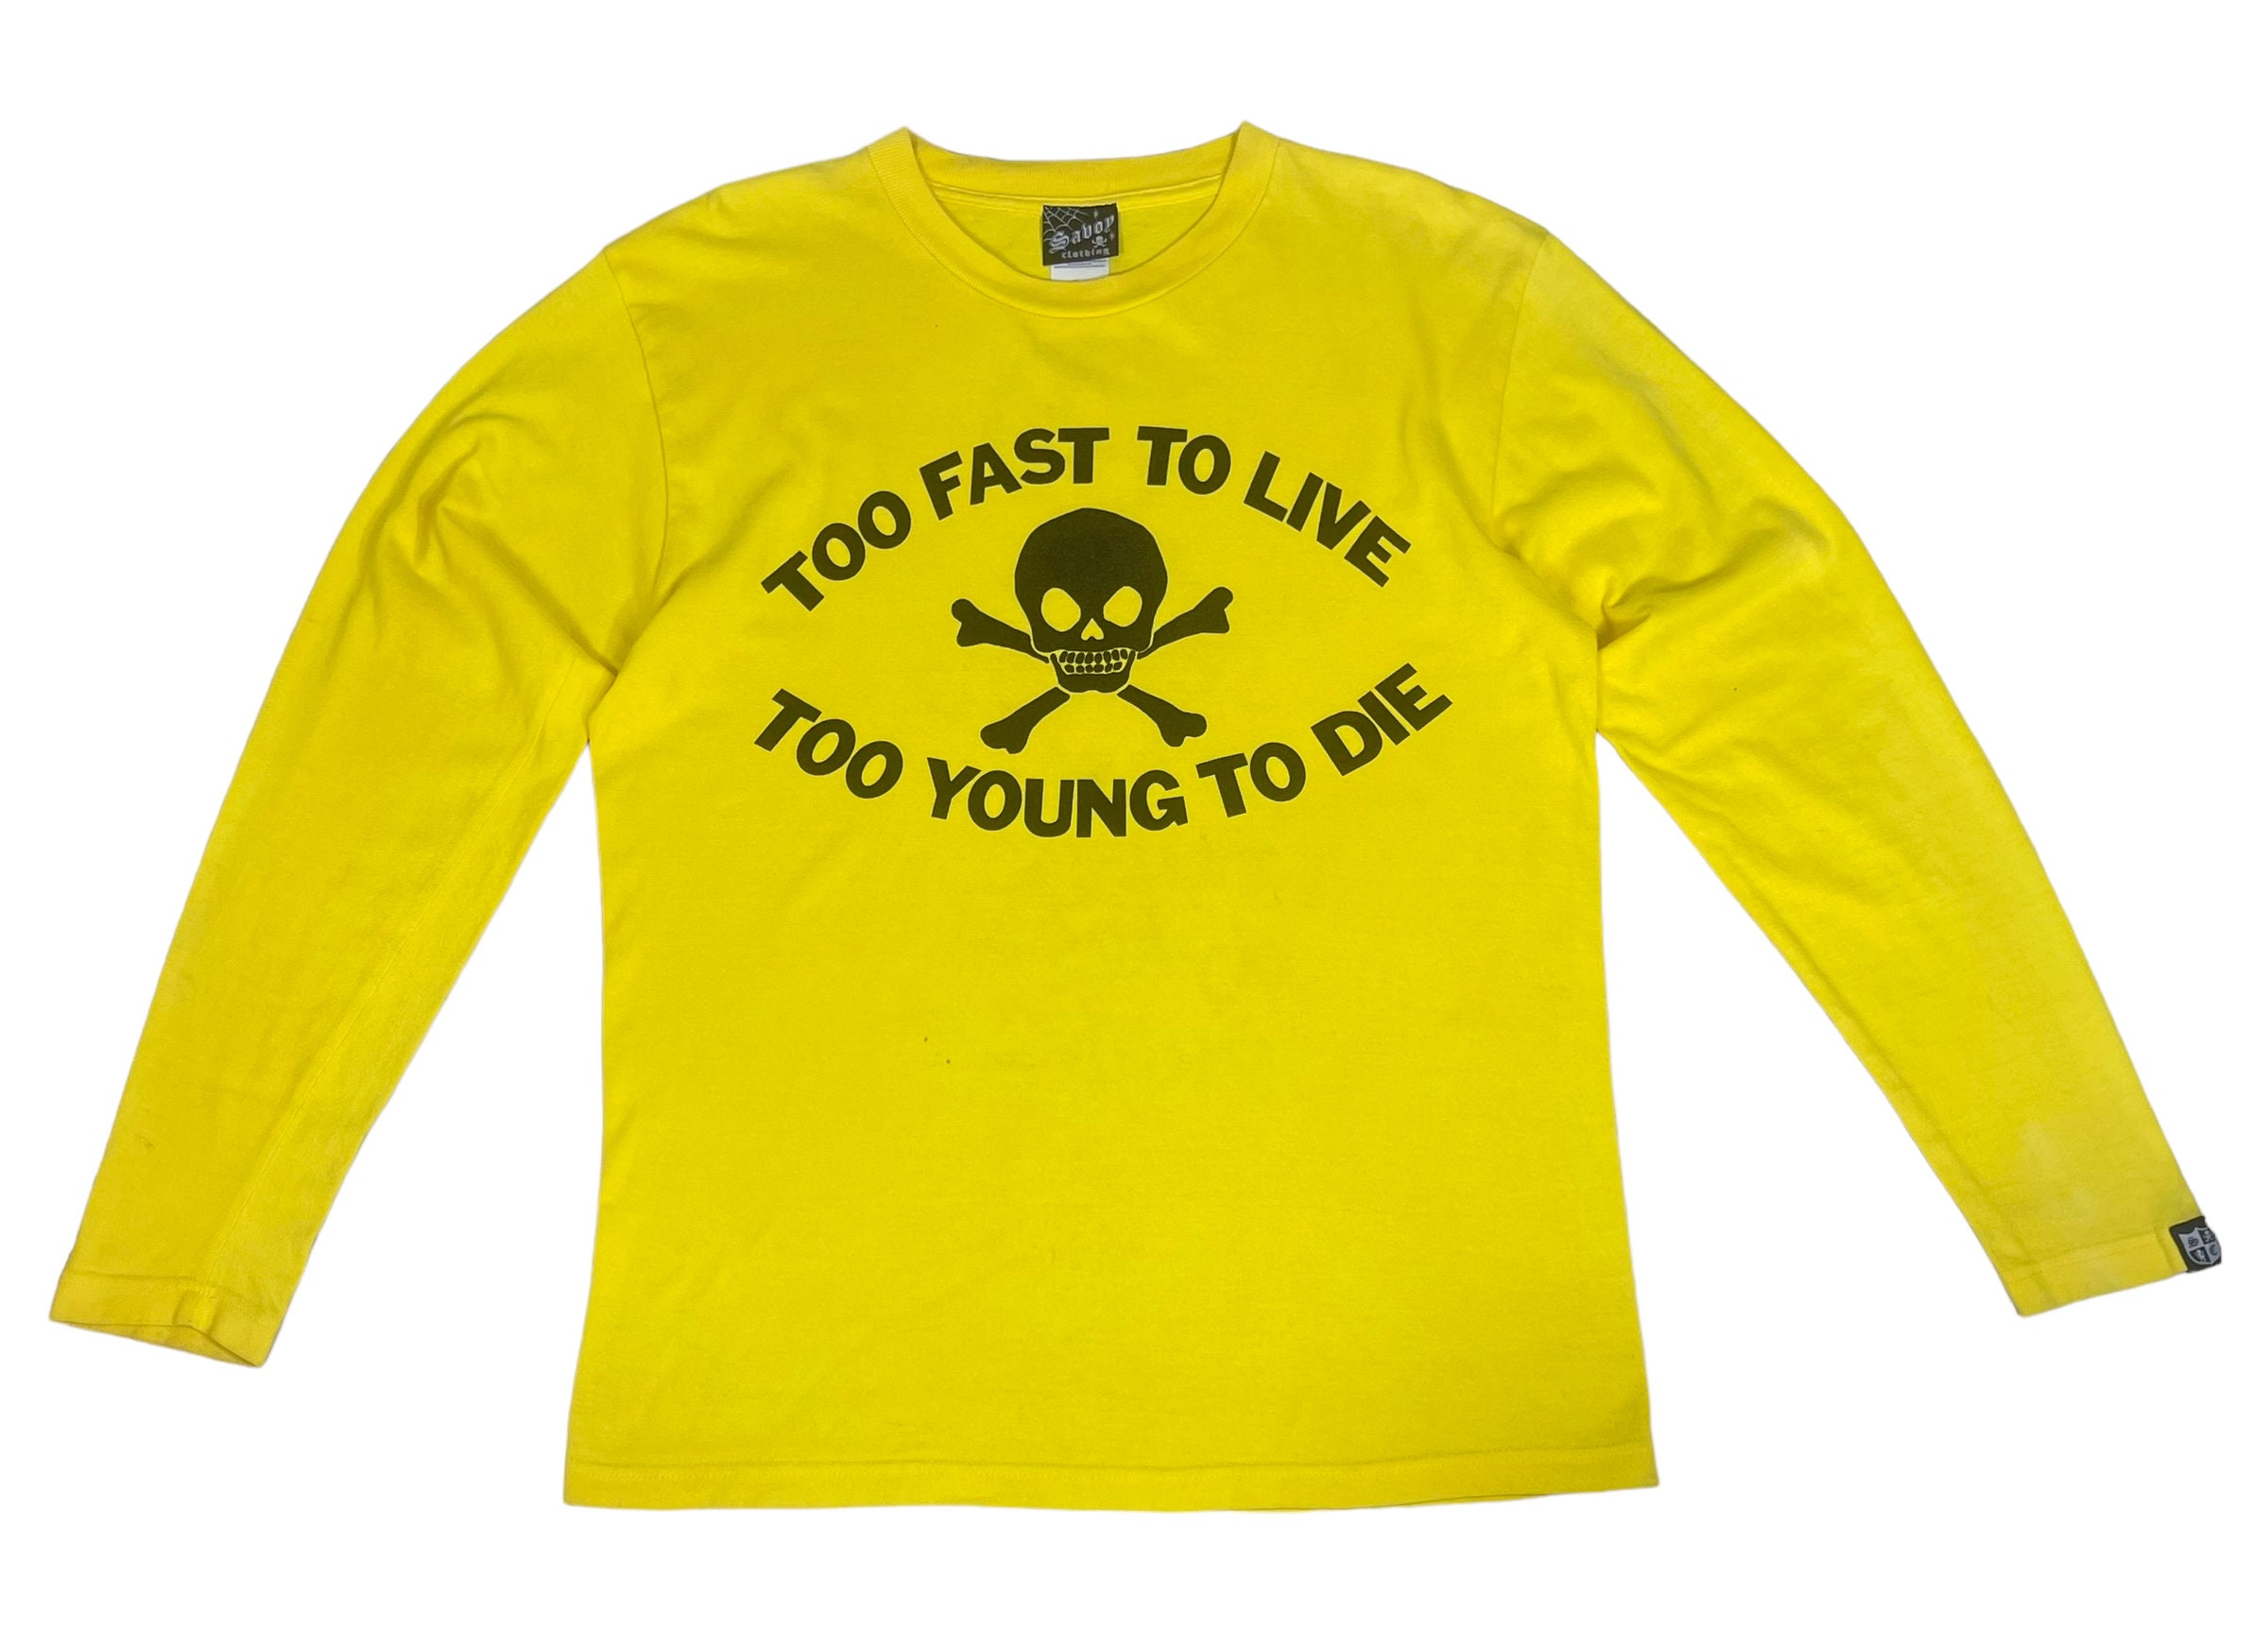 Too Fast to Live Too Young to Die - Etsy